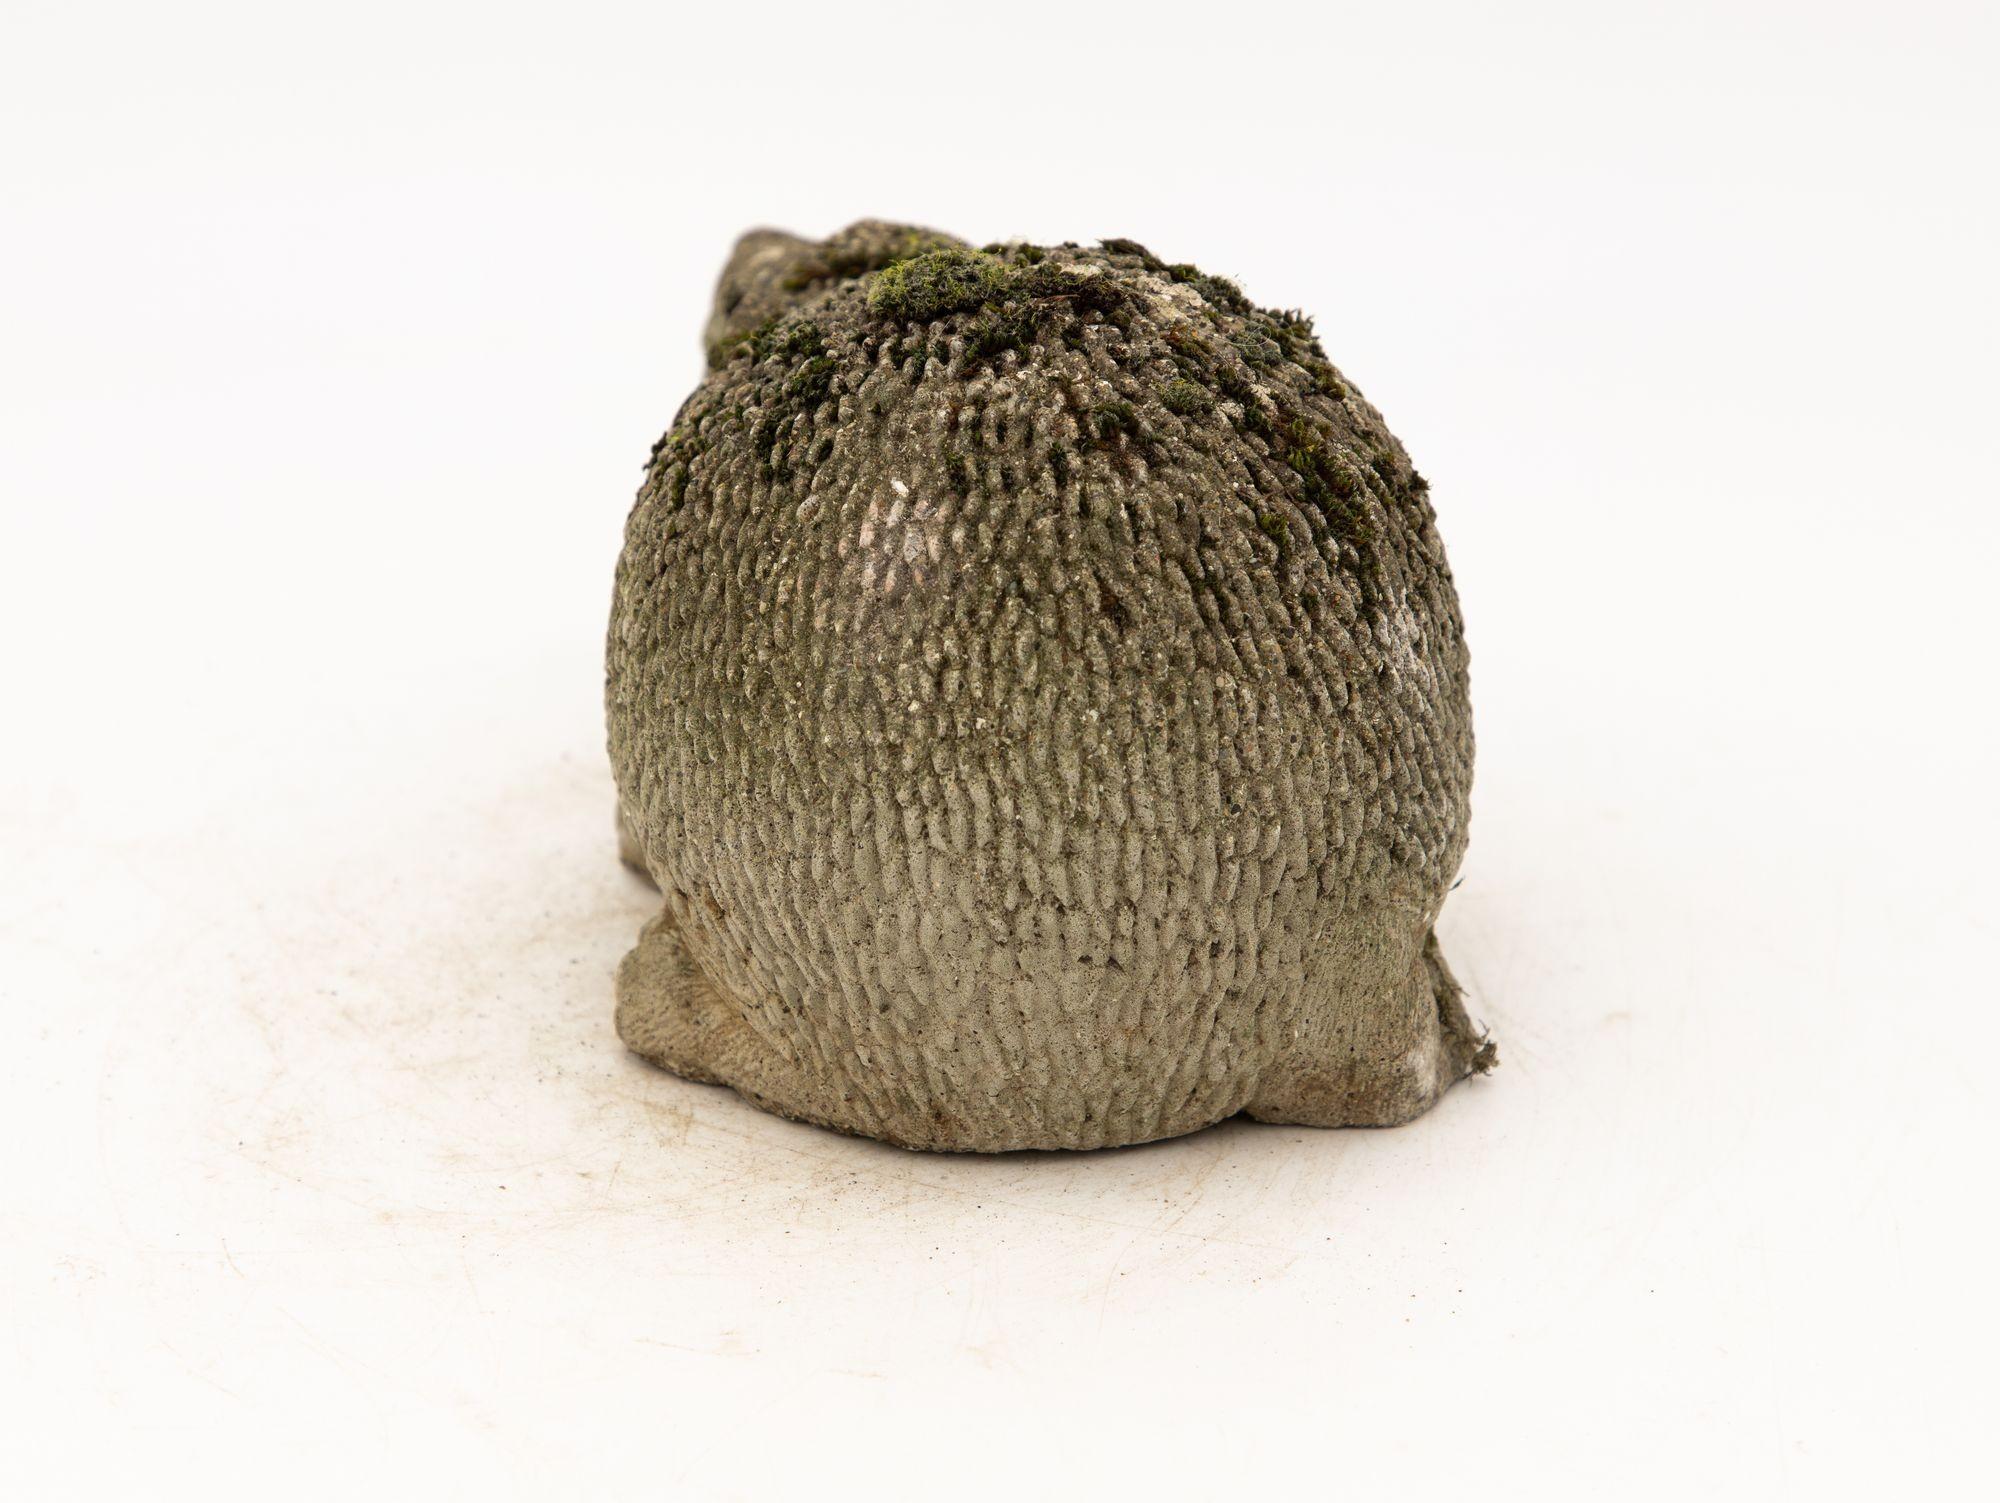 Reconstituted Stone Hedgehog Garden Ornament, 20th Century In Good Condition For Sale In South Salem, NY